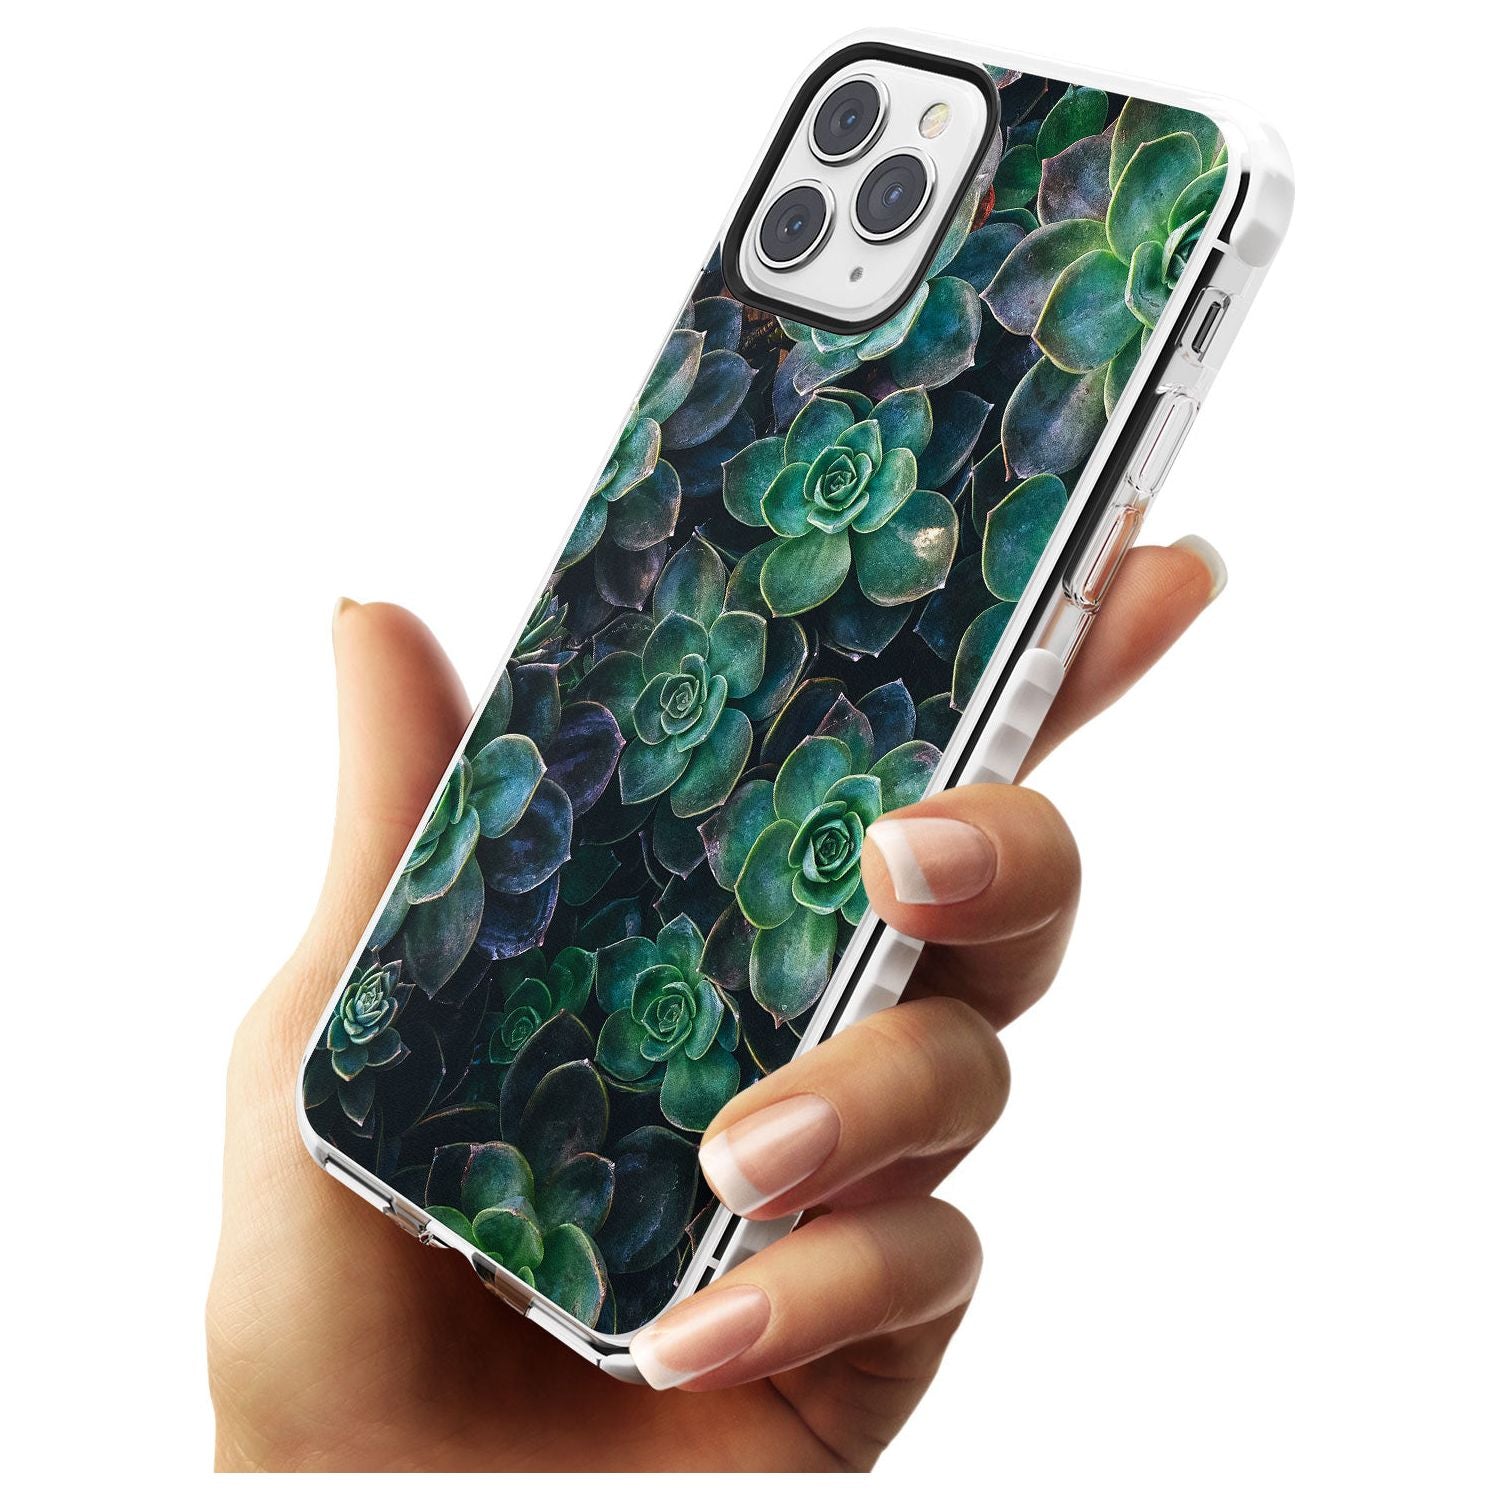 Succulents - Real Botanical Photographs Impact Phone Case for iPhone 11 Pro Max